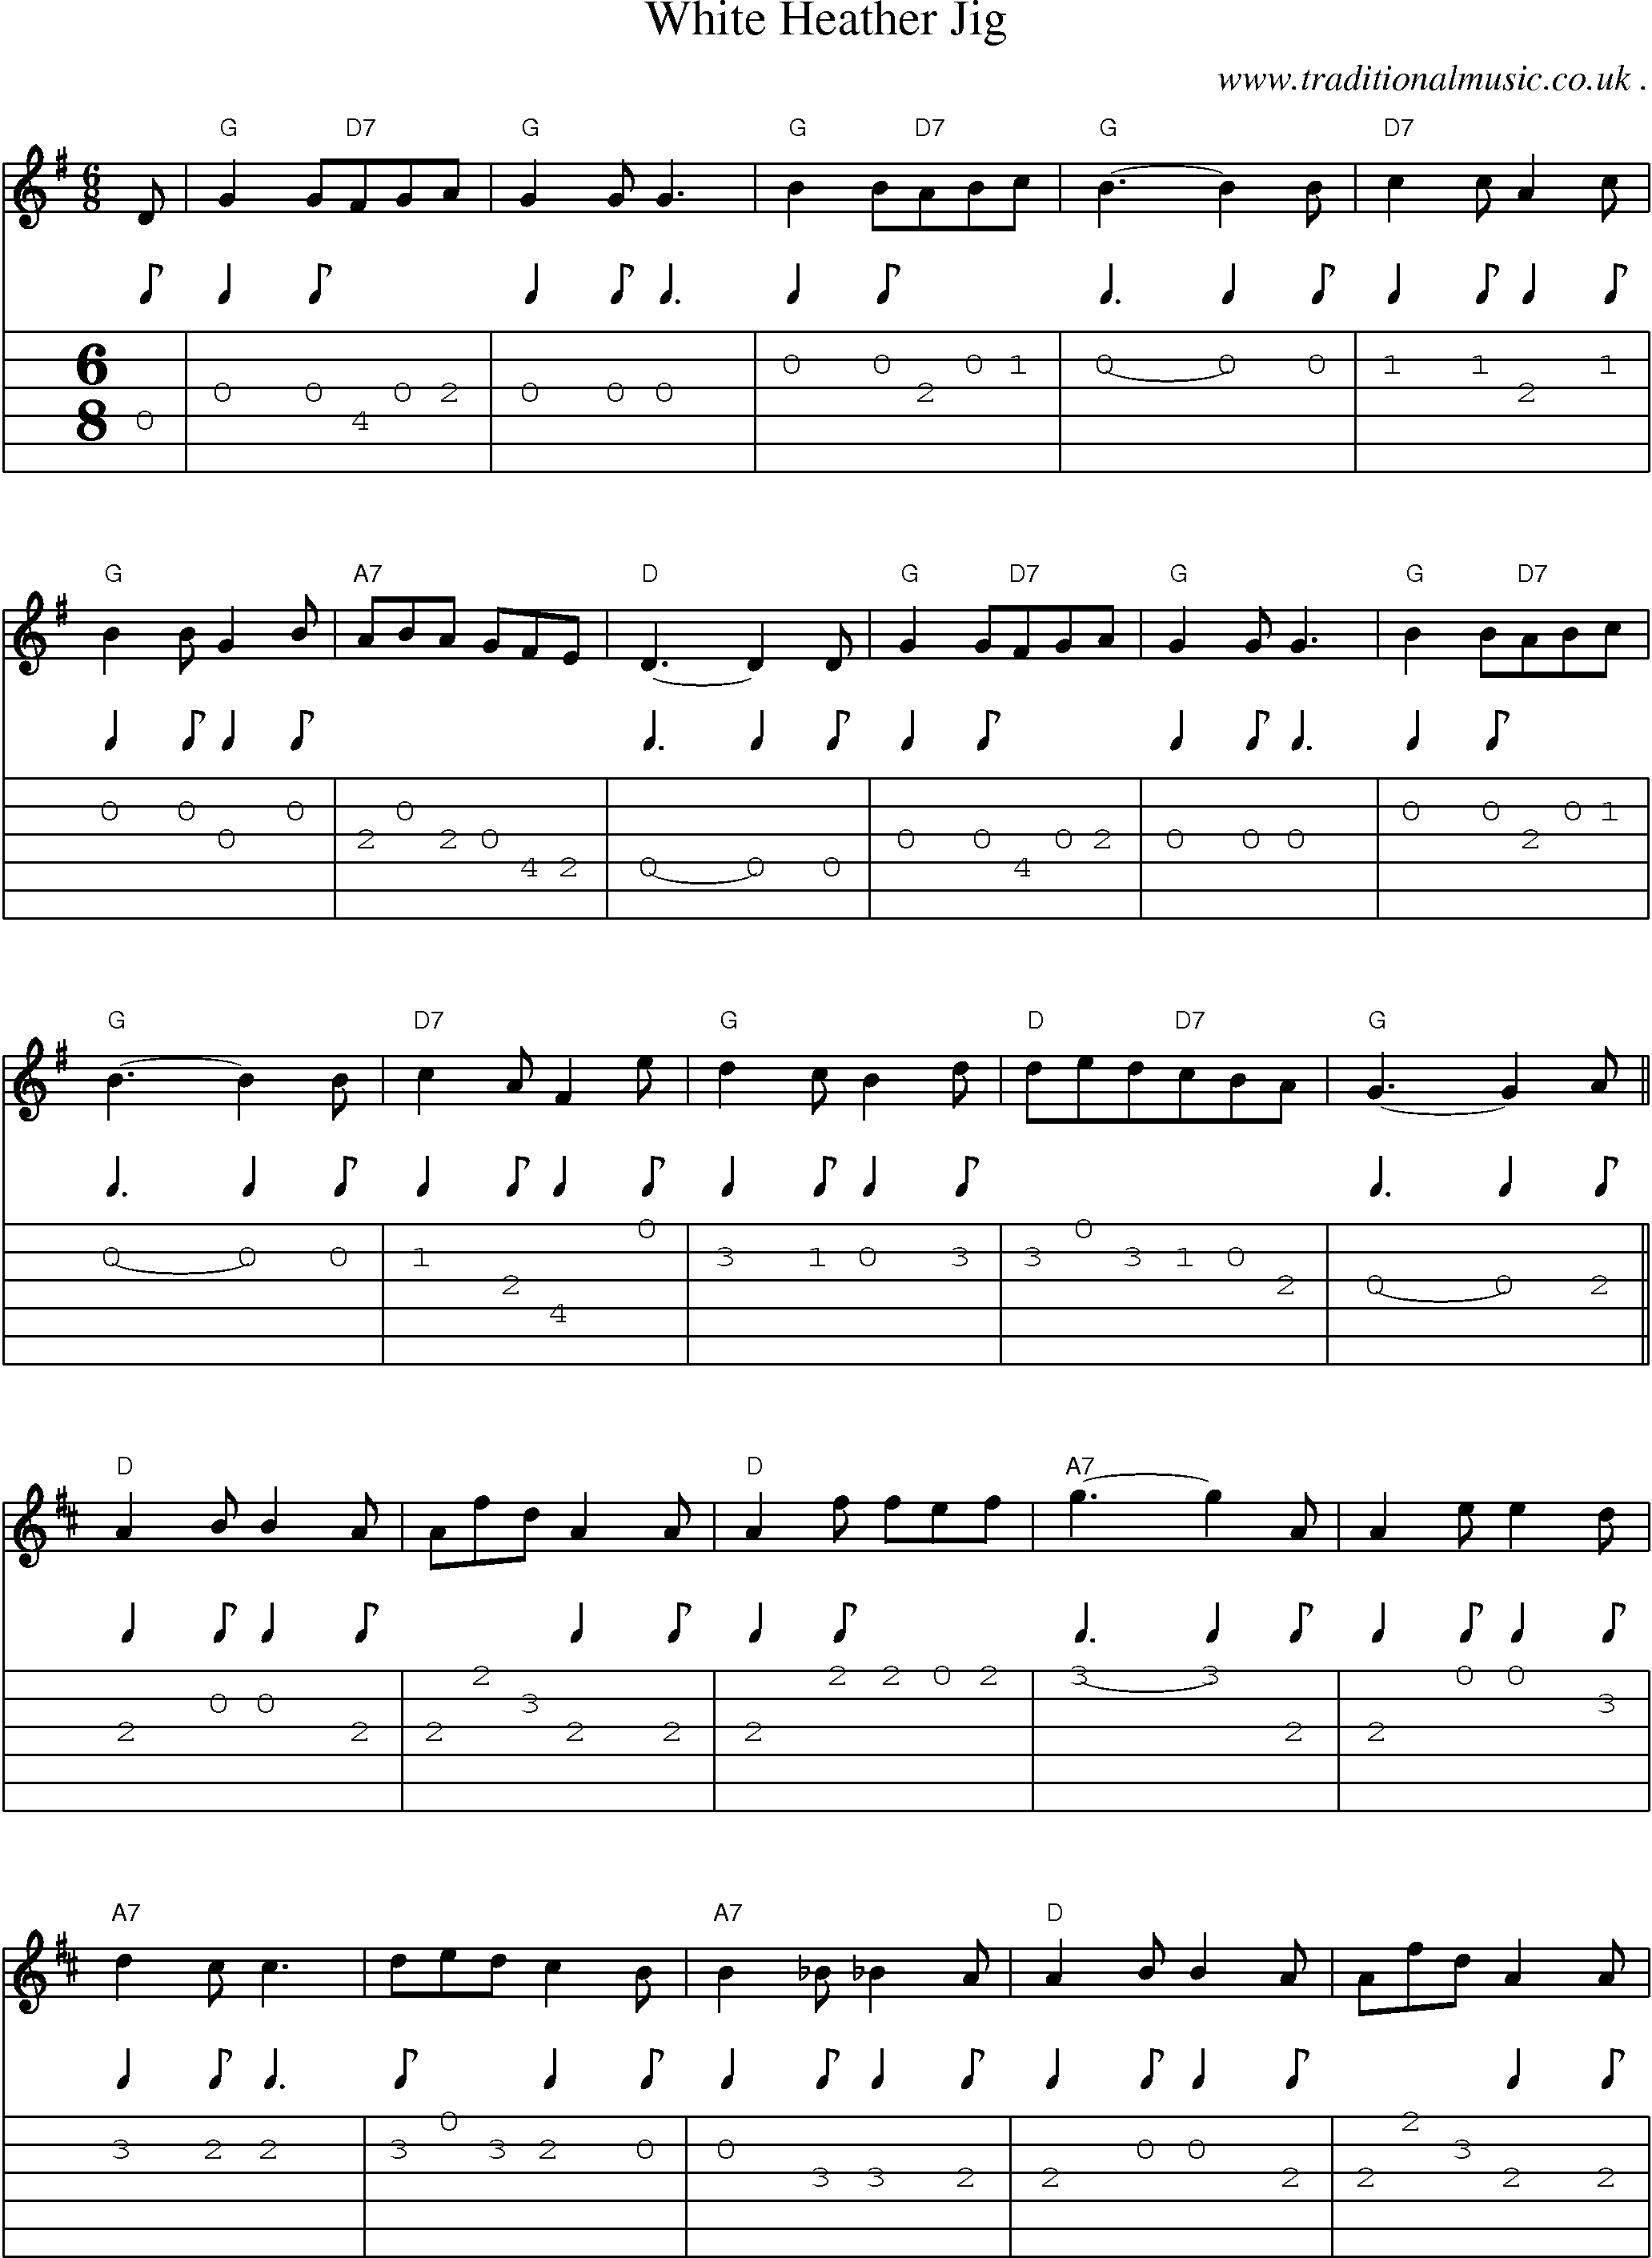 Sheet-Music and Guitar Tabs for White Heather Jig